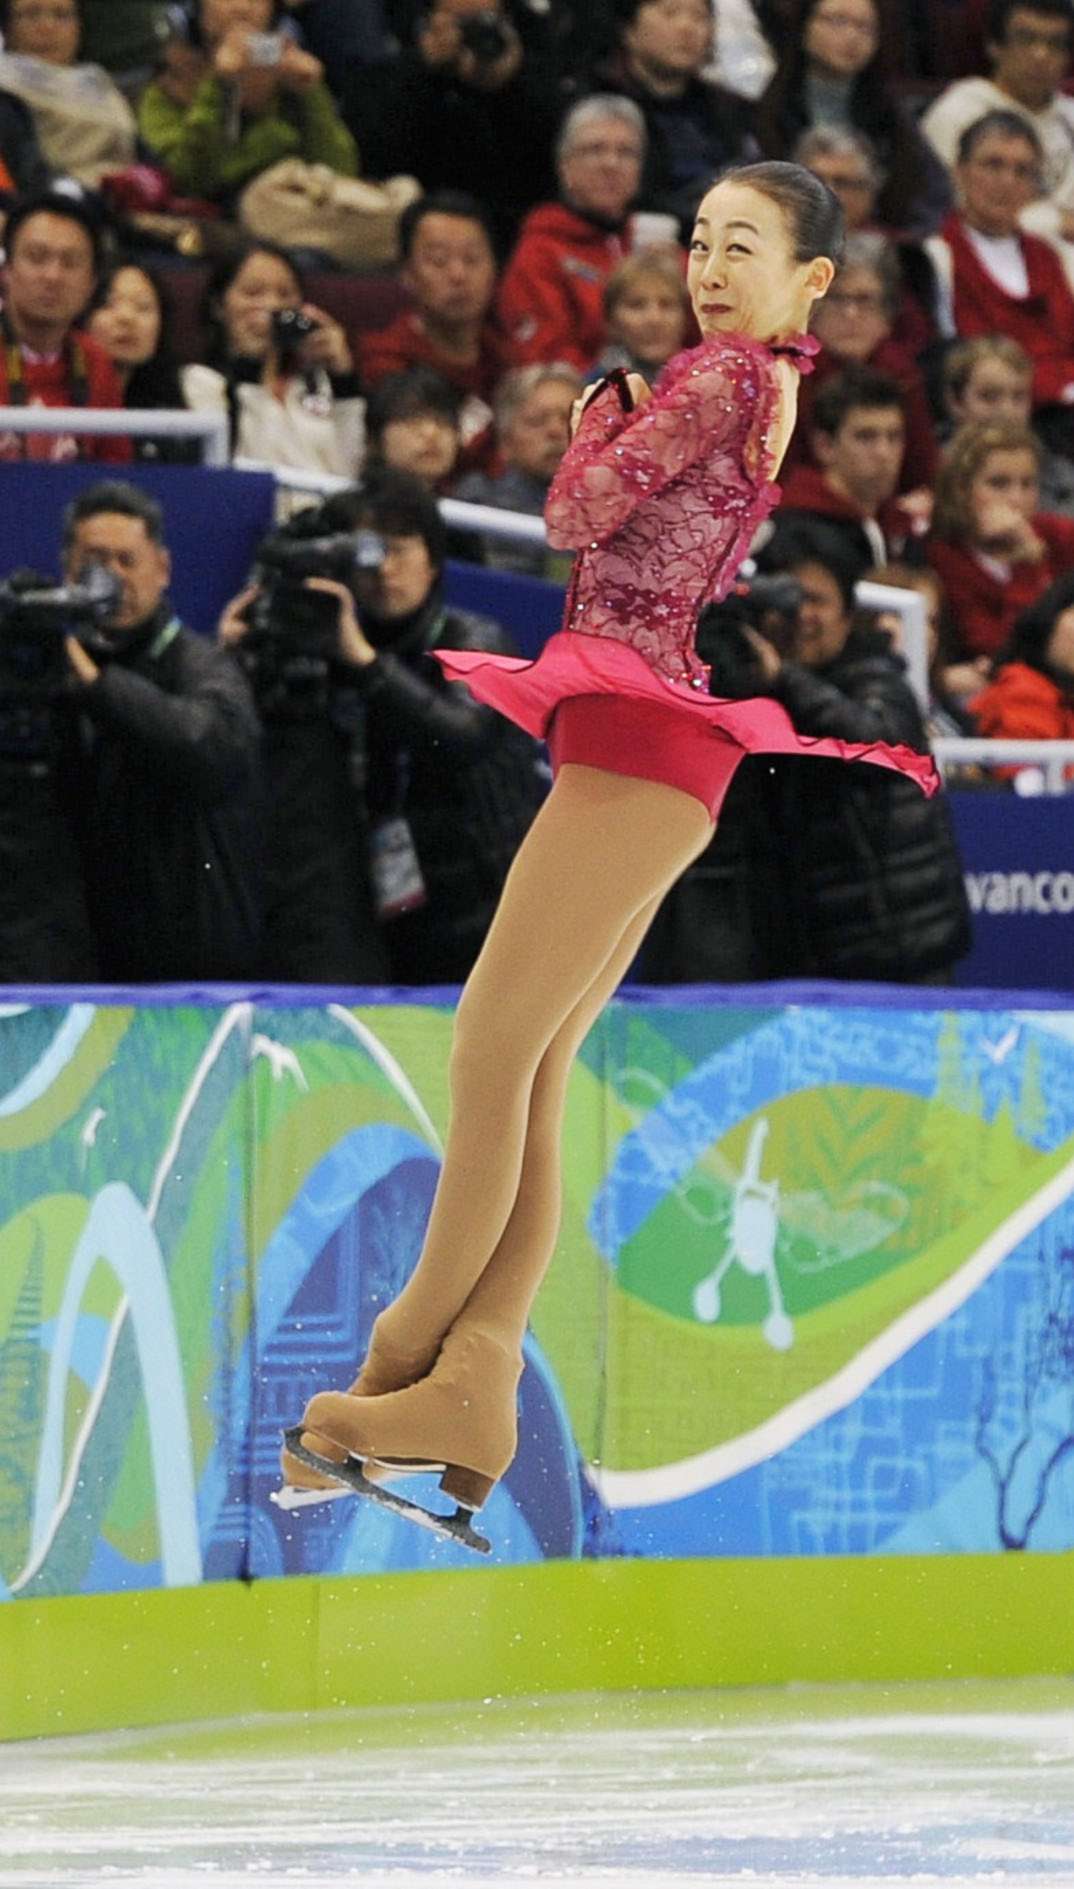 PHOTO: Japanese figure skater Mao Asada nails a triple axel in her short program at the Vancouver Olympics in Feb. 2010. 